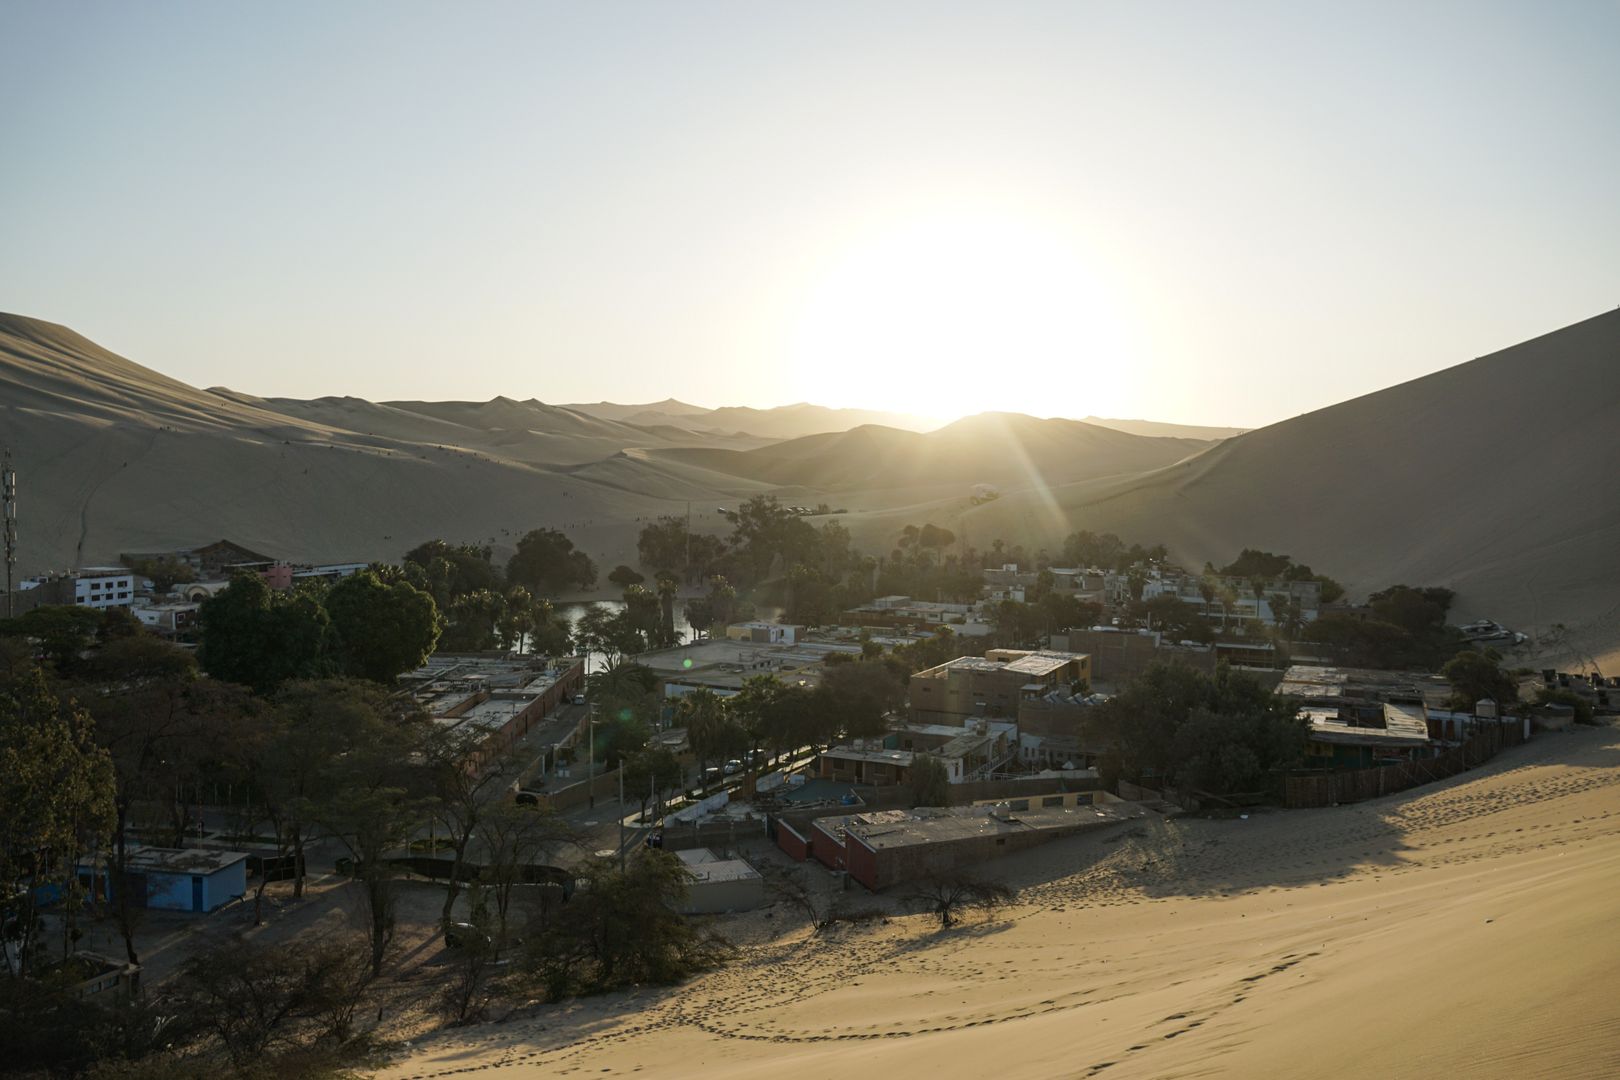 A town in the desert with sand dunes in the background.